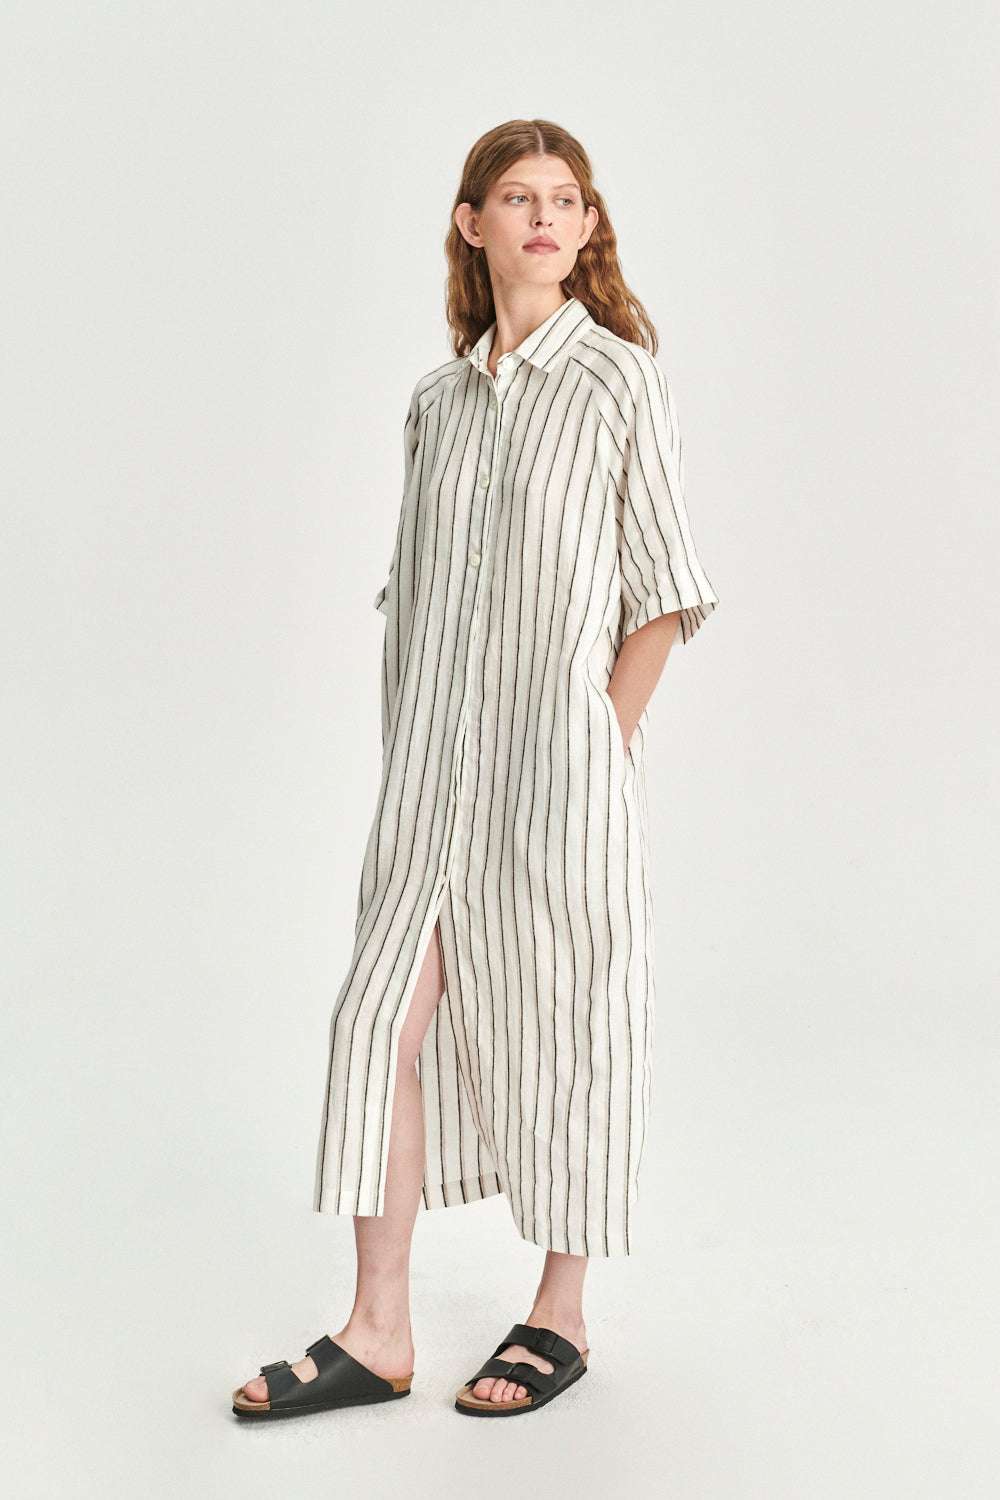 Dress in a White and Black Striped Linen